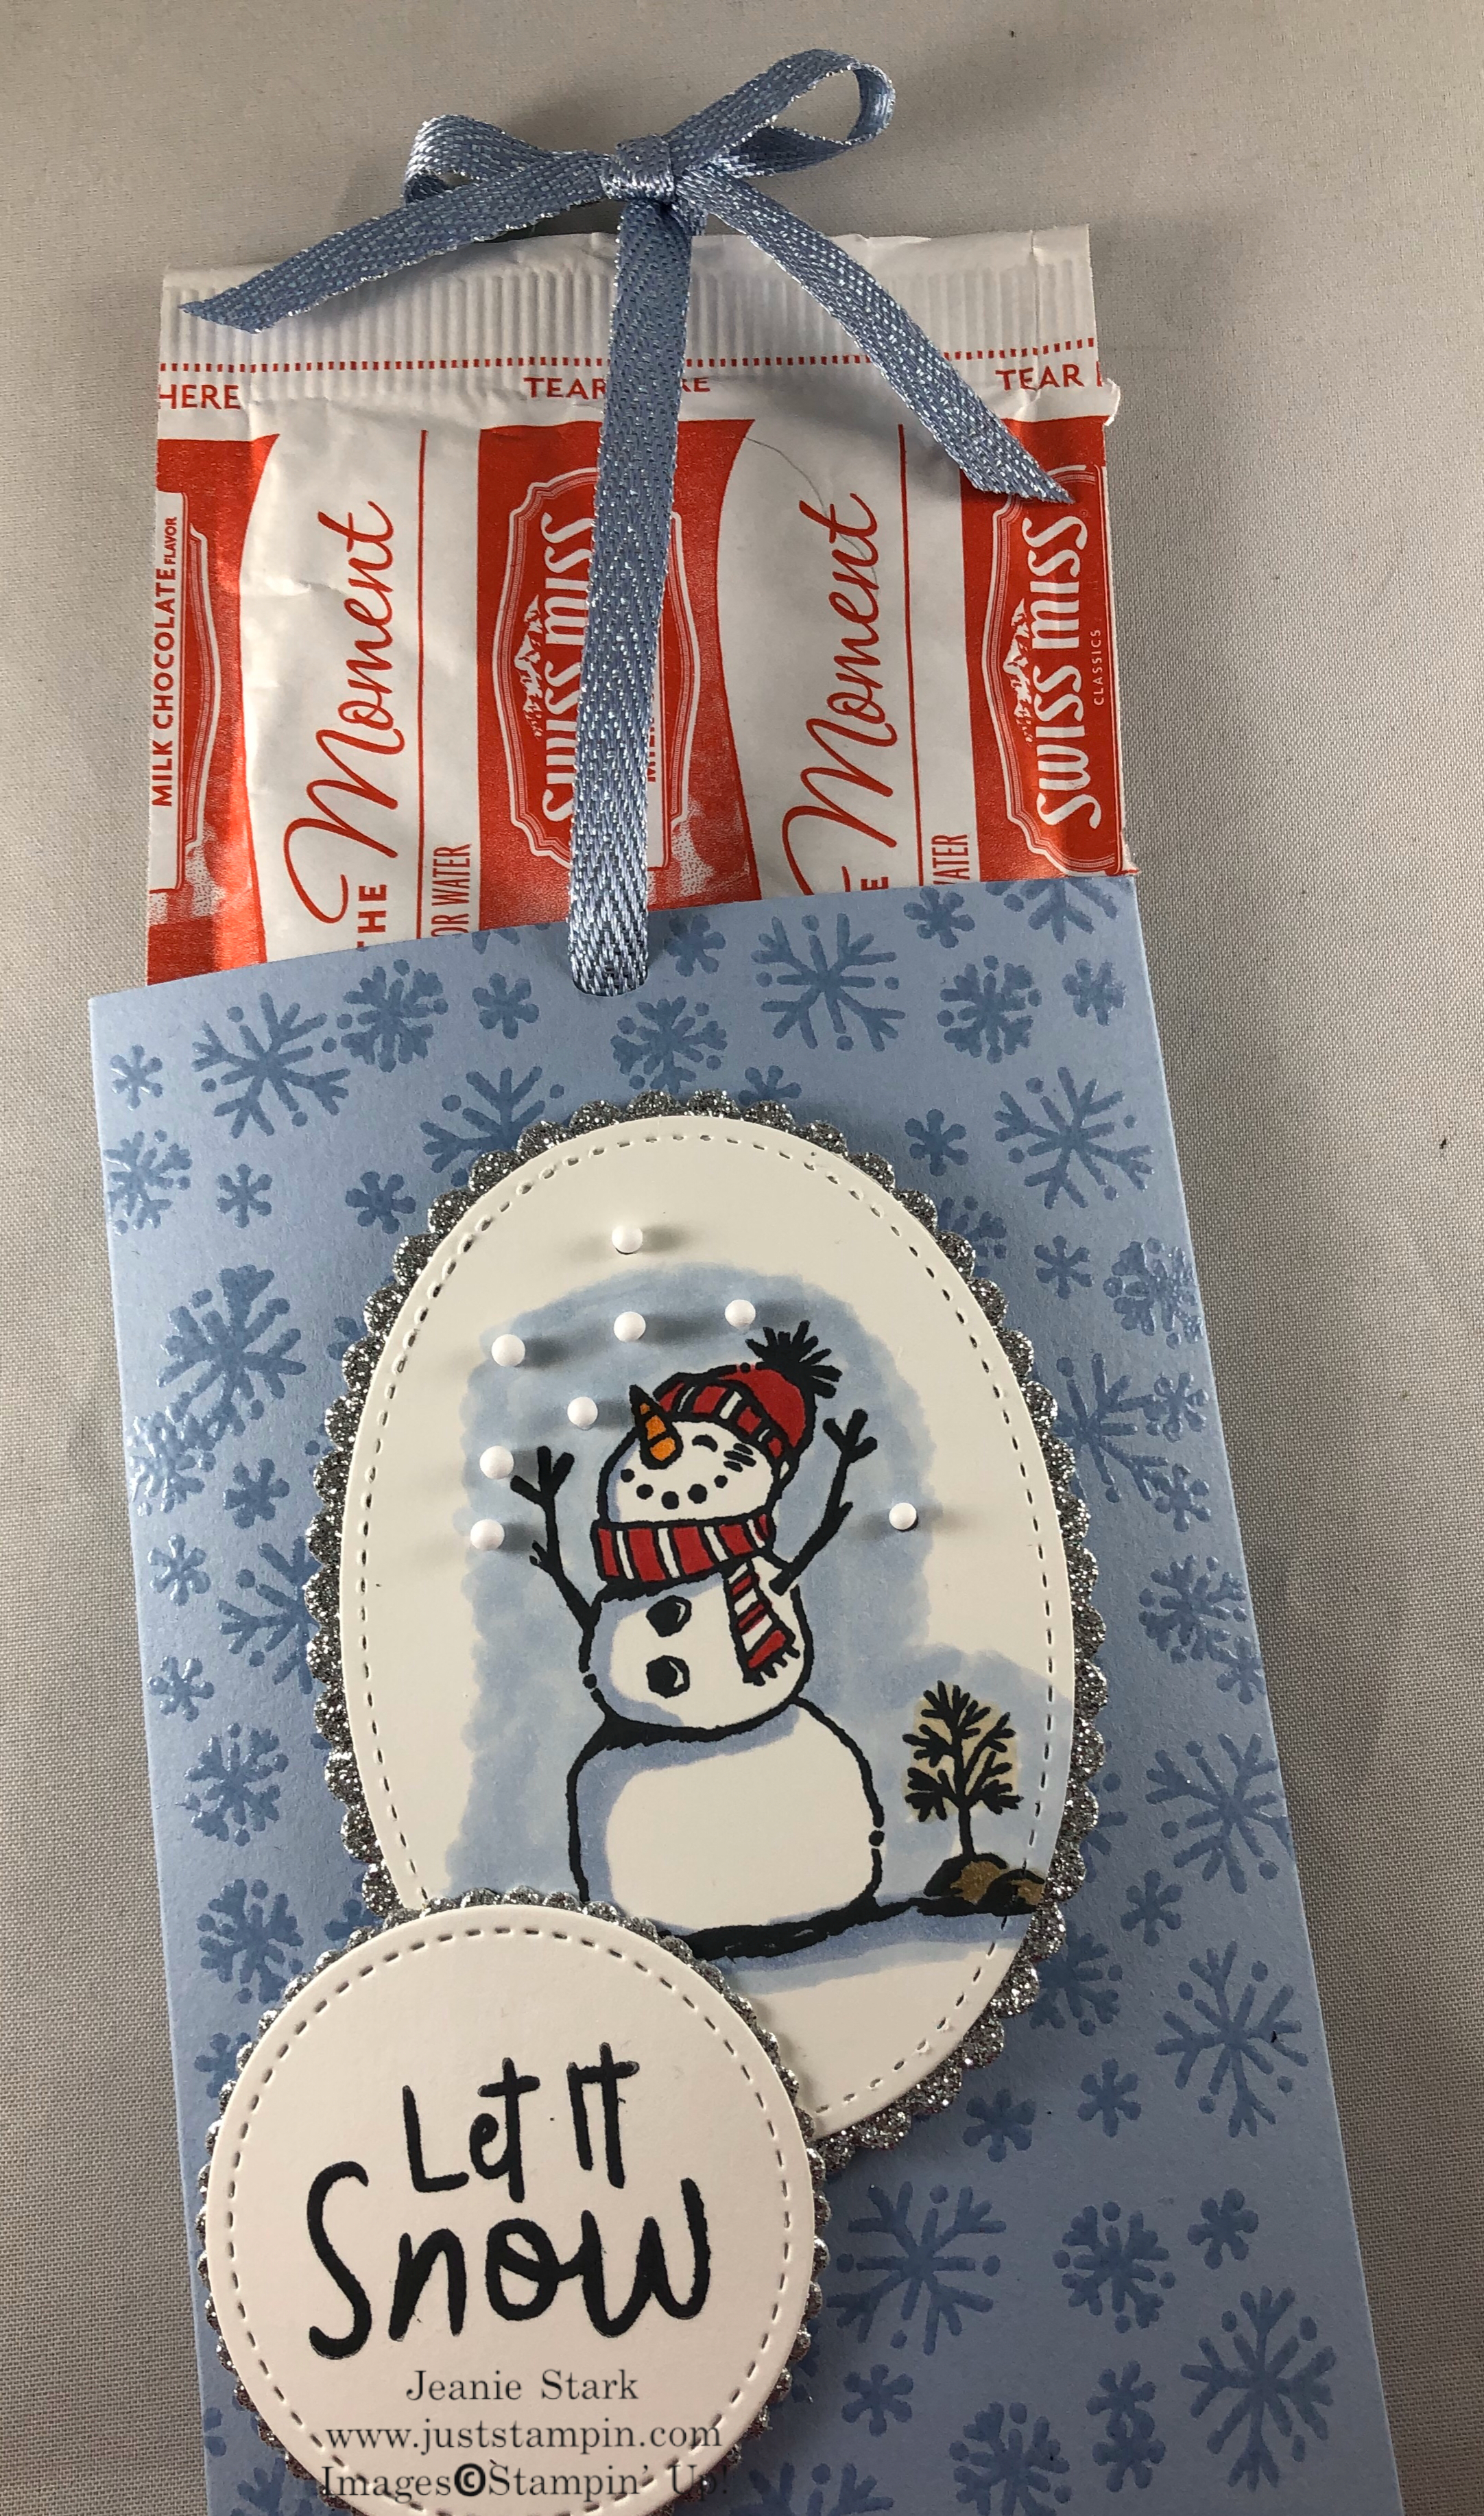 Stampin' Up! Snowman Season Cocoa Mix gift idea - Jeanie Stark StampinUp